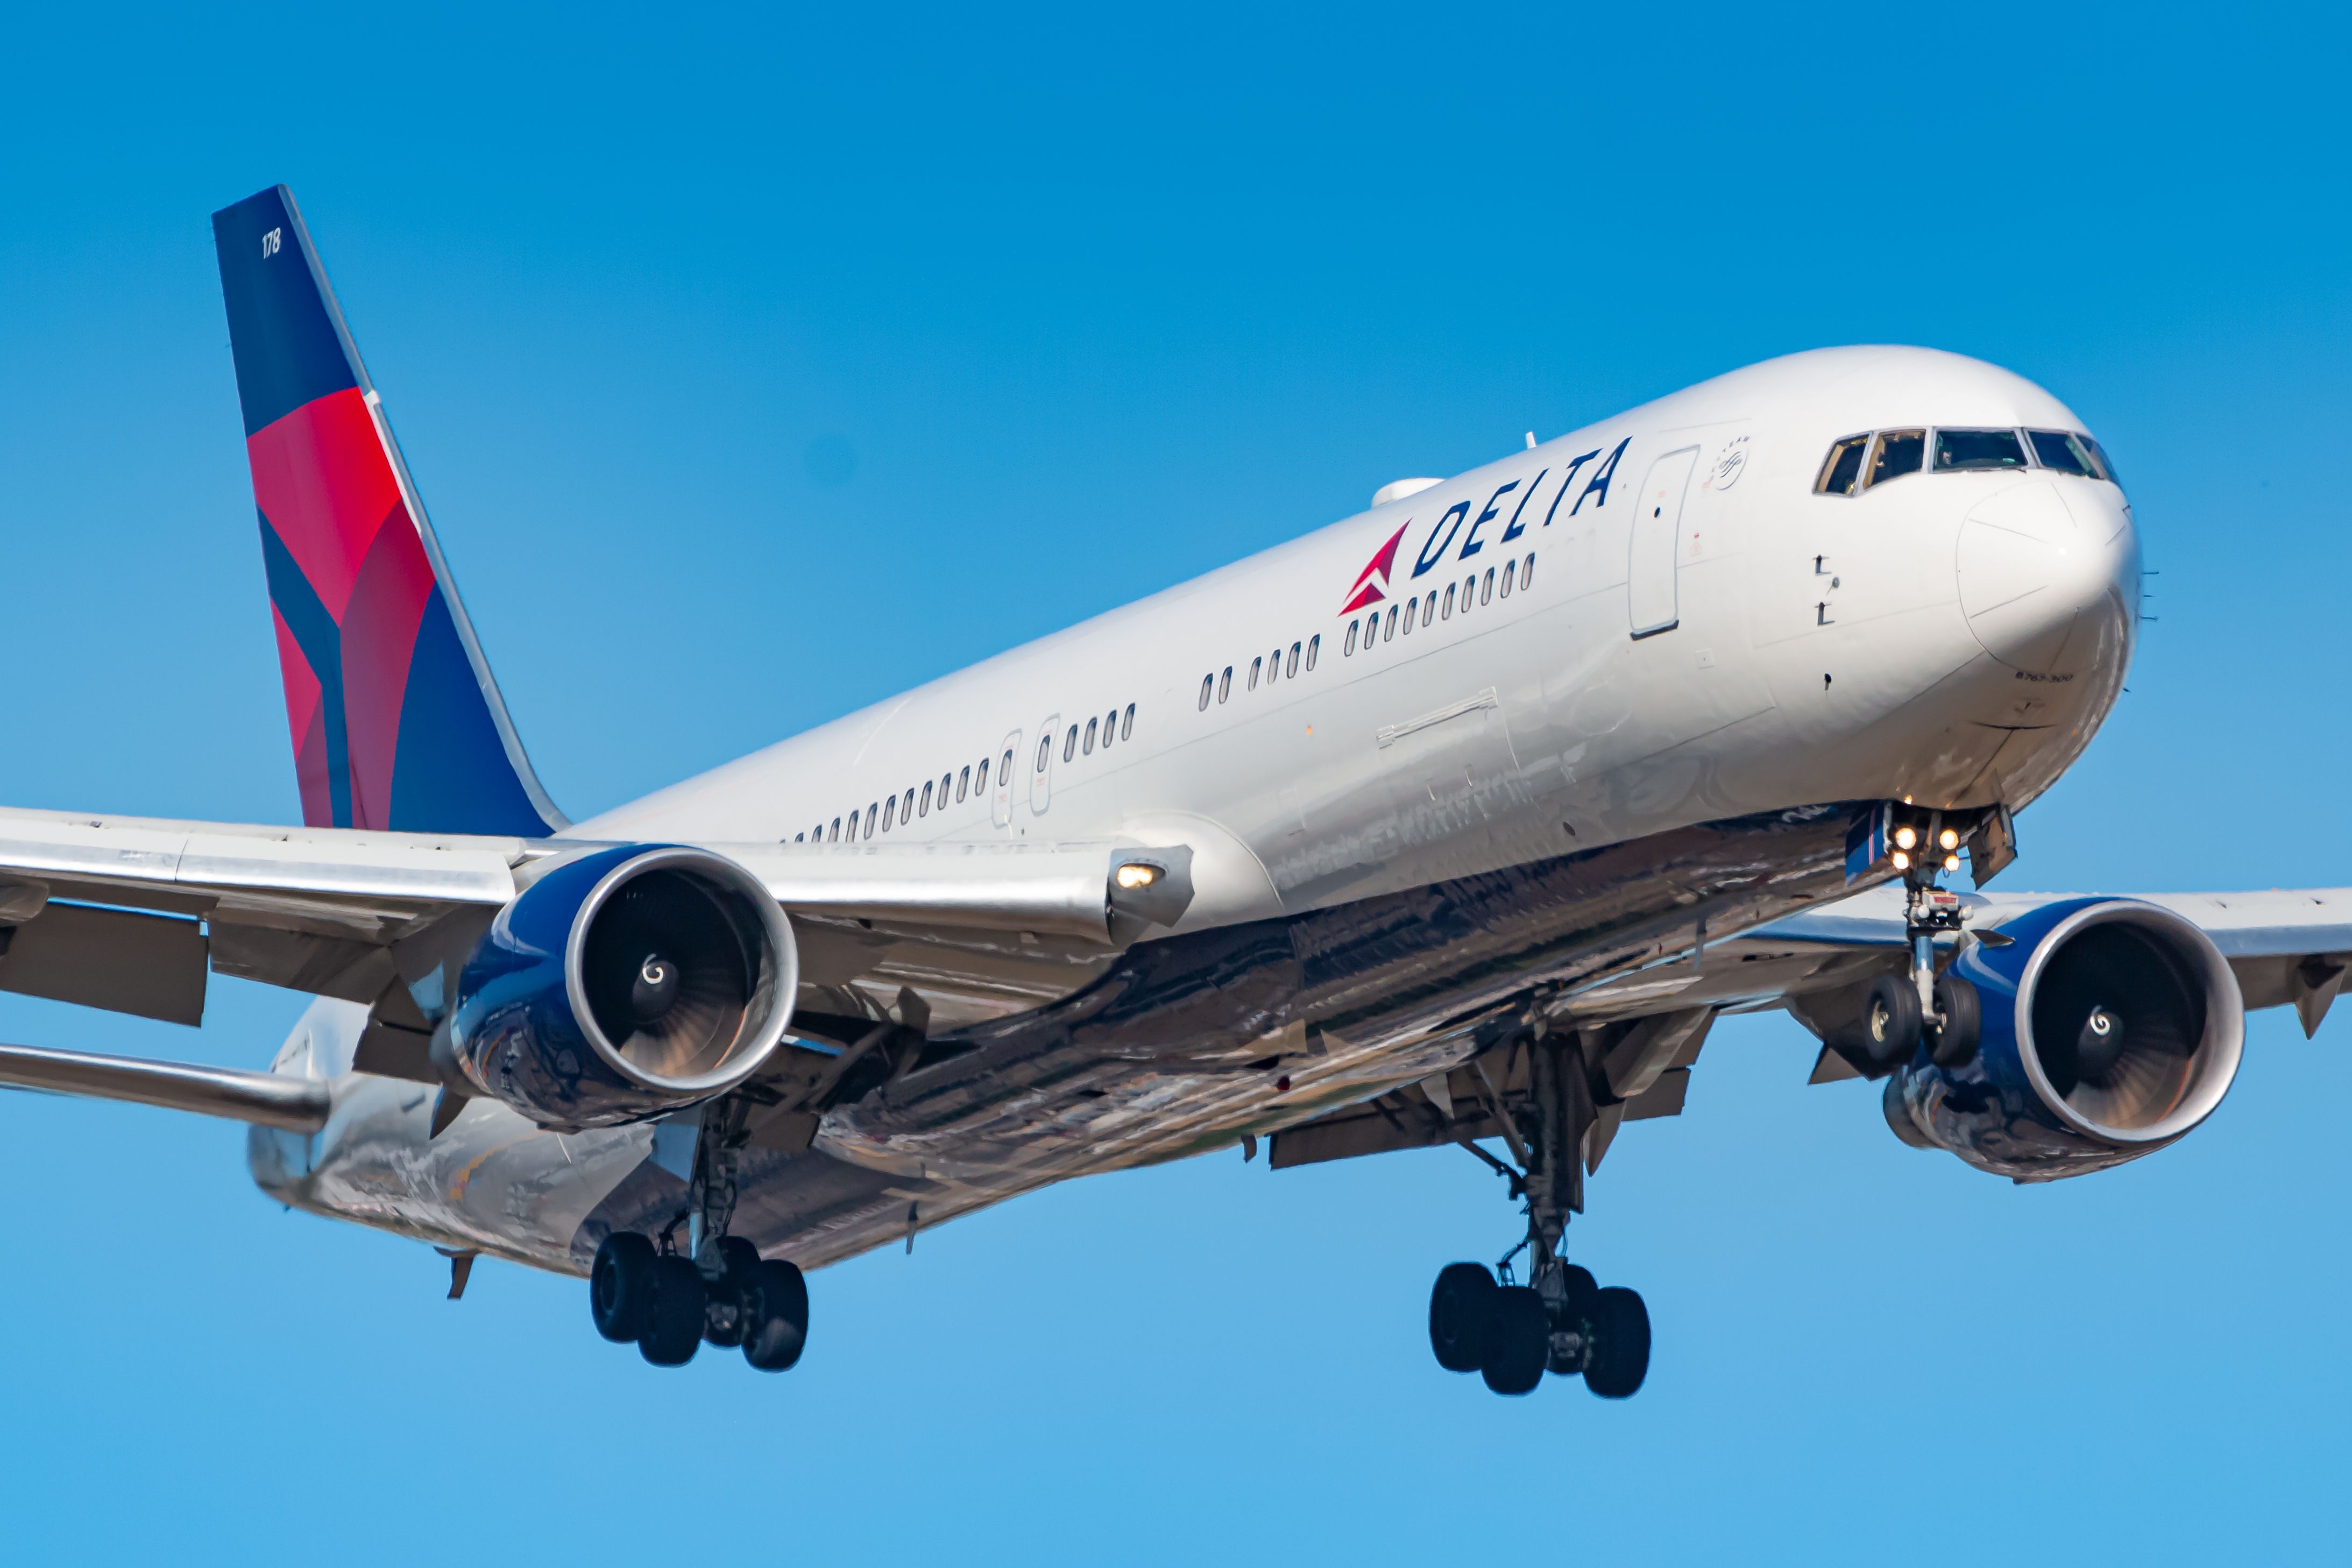 A Delta Air Lines Boeing 767 flying in the sky.